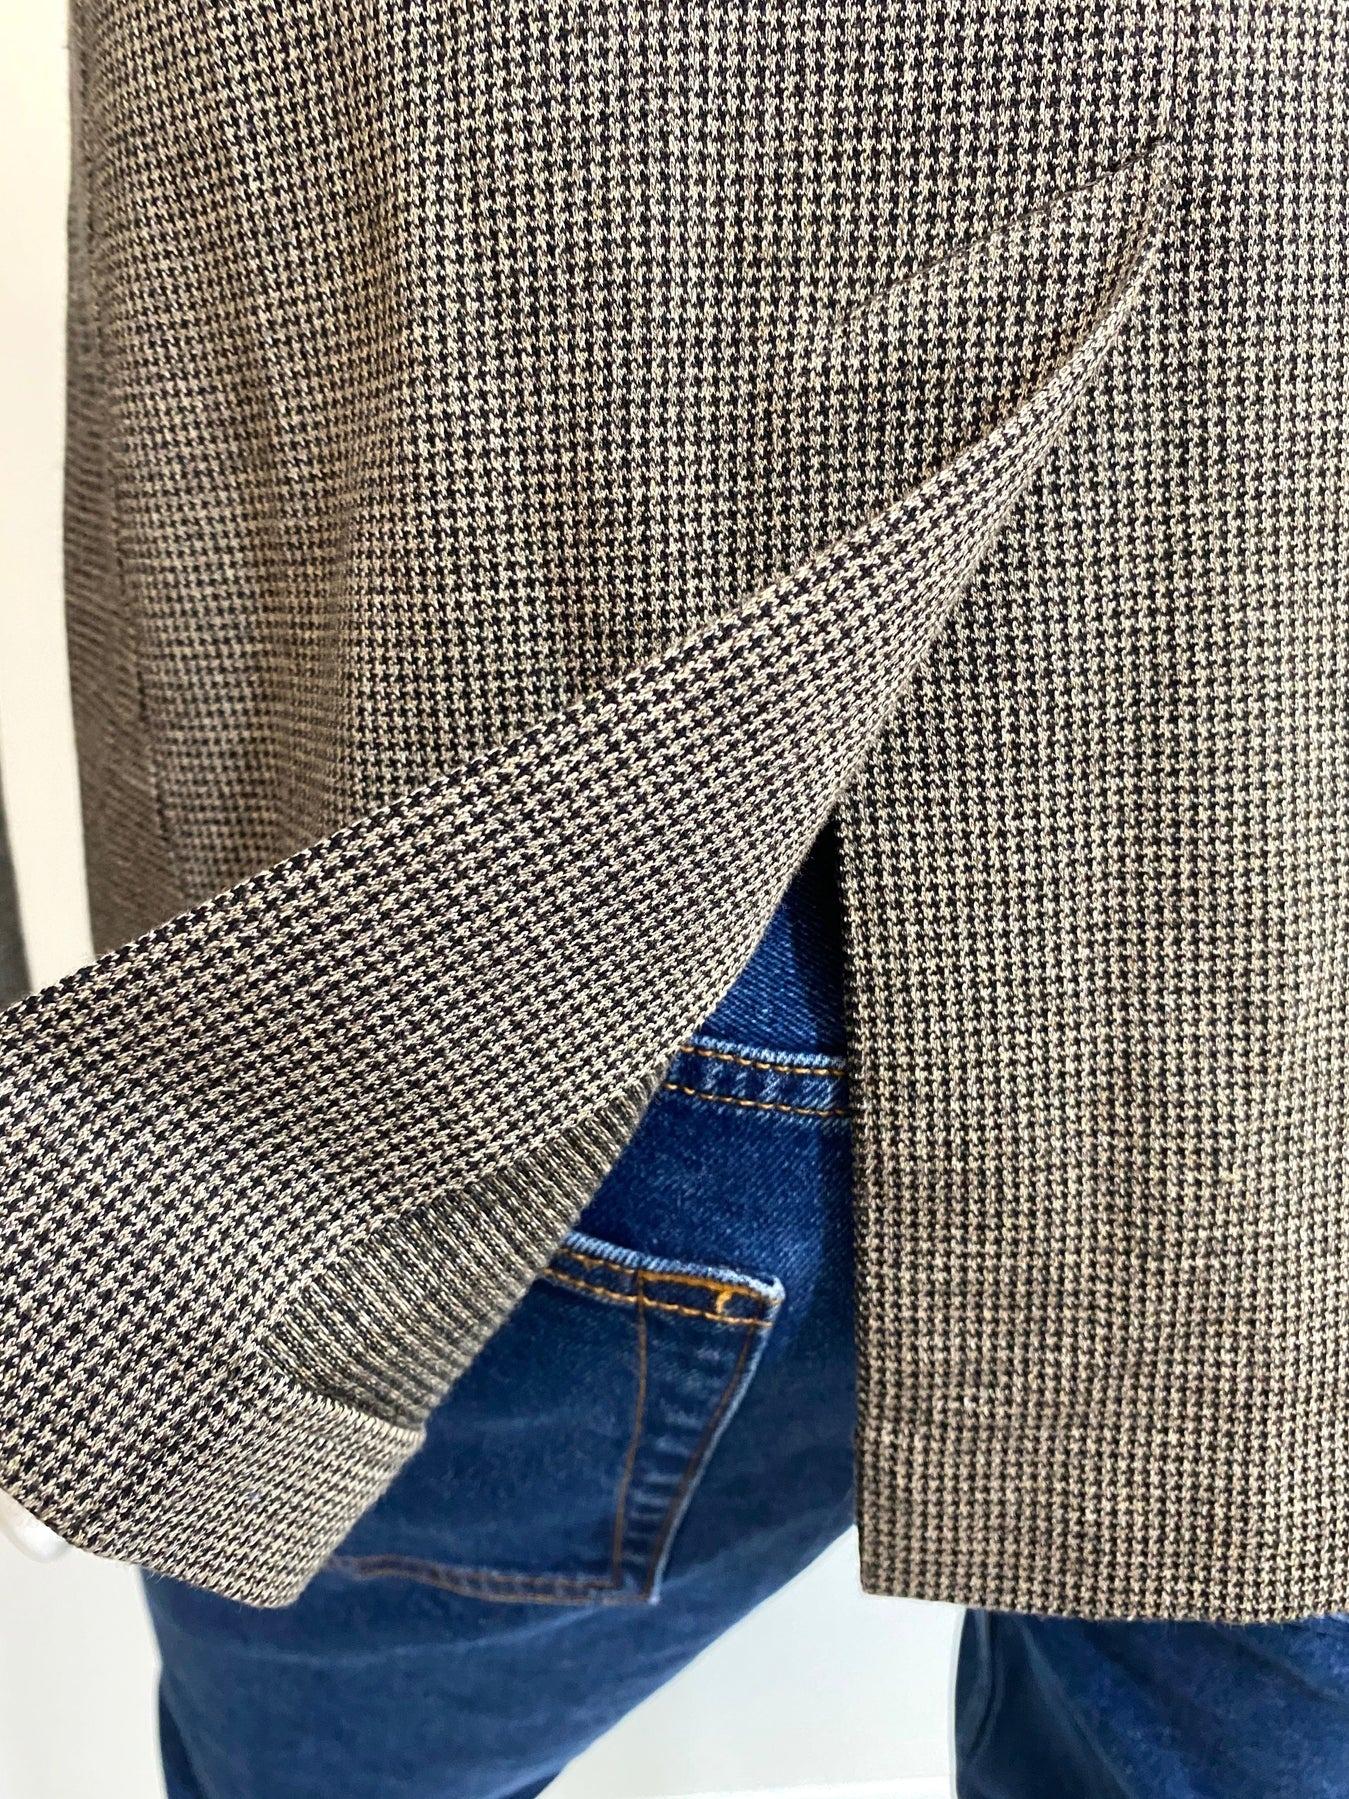 Burberry Houndstooth Jacket For Sale 3